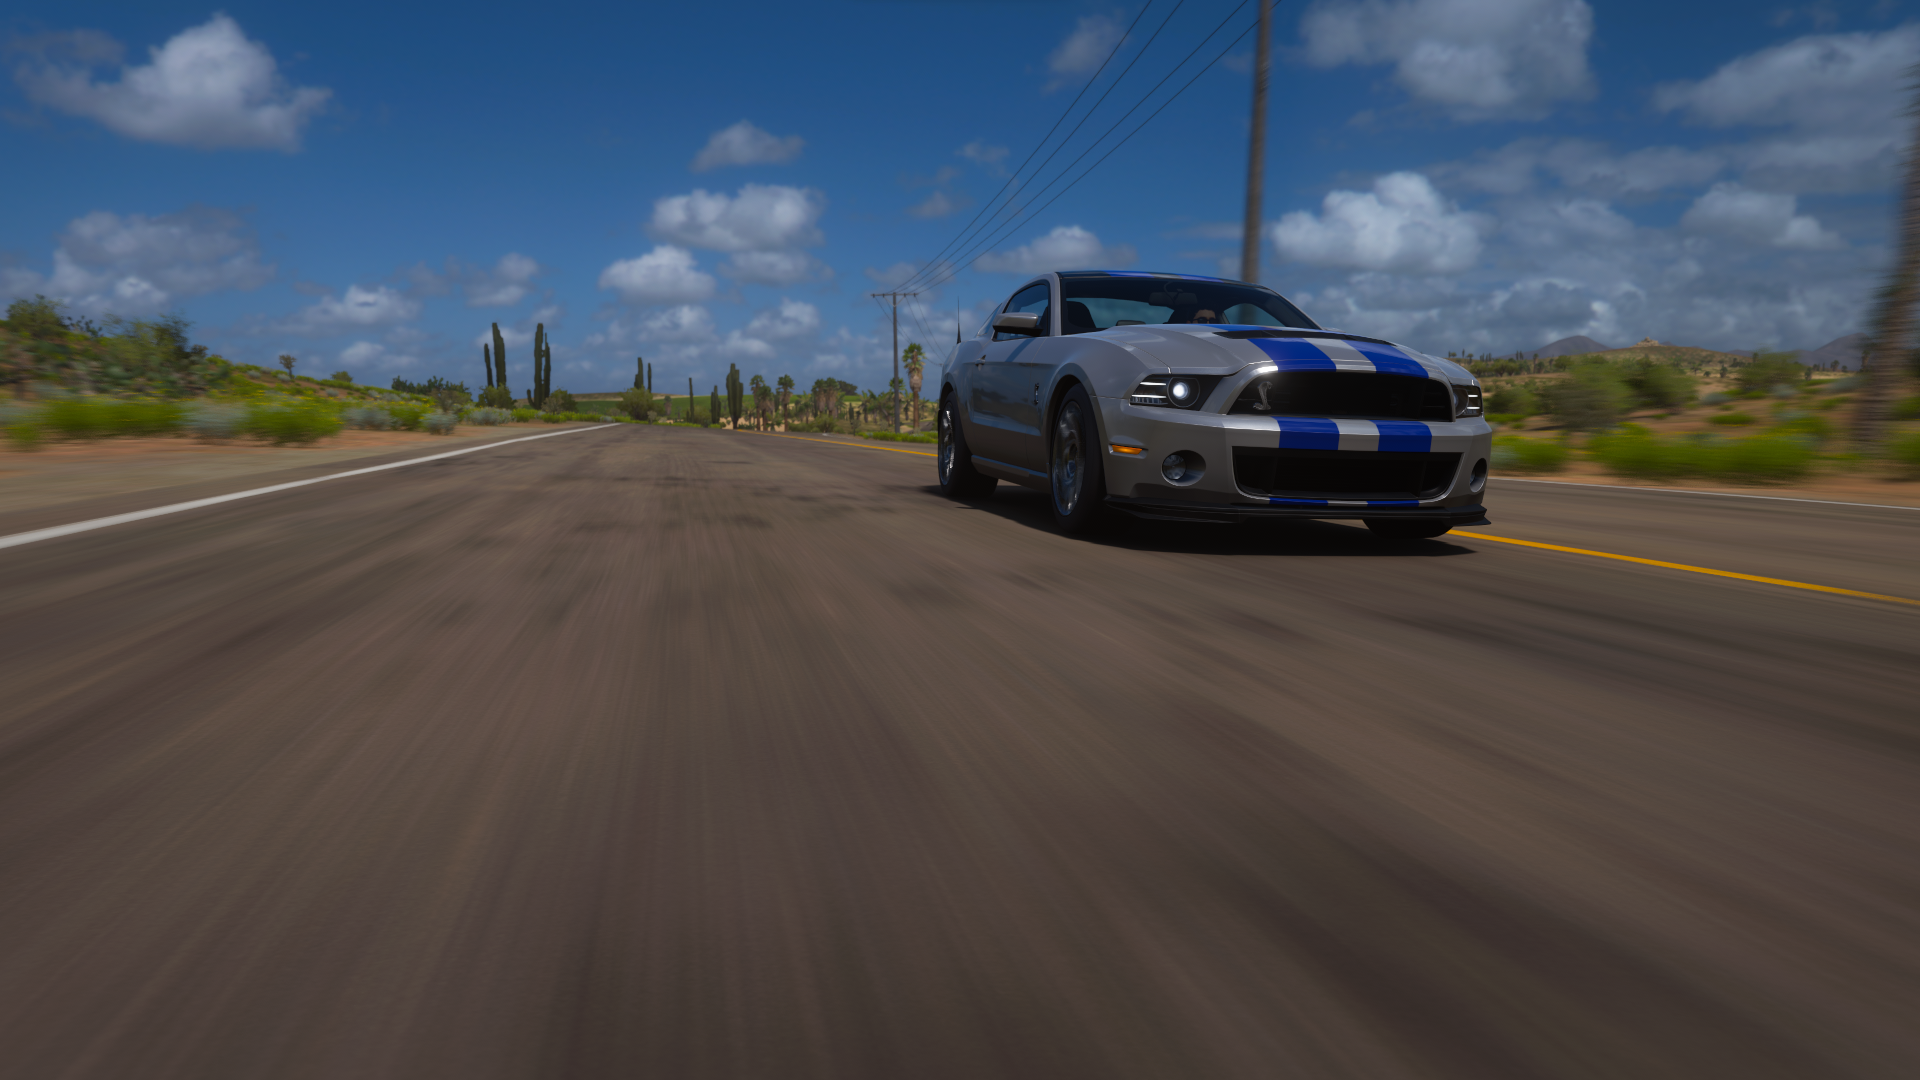 Forza Forza Horizon 5 Ford Mustang Shelby Car Road CGi Clouds Sky 1920x1080